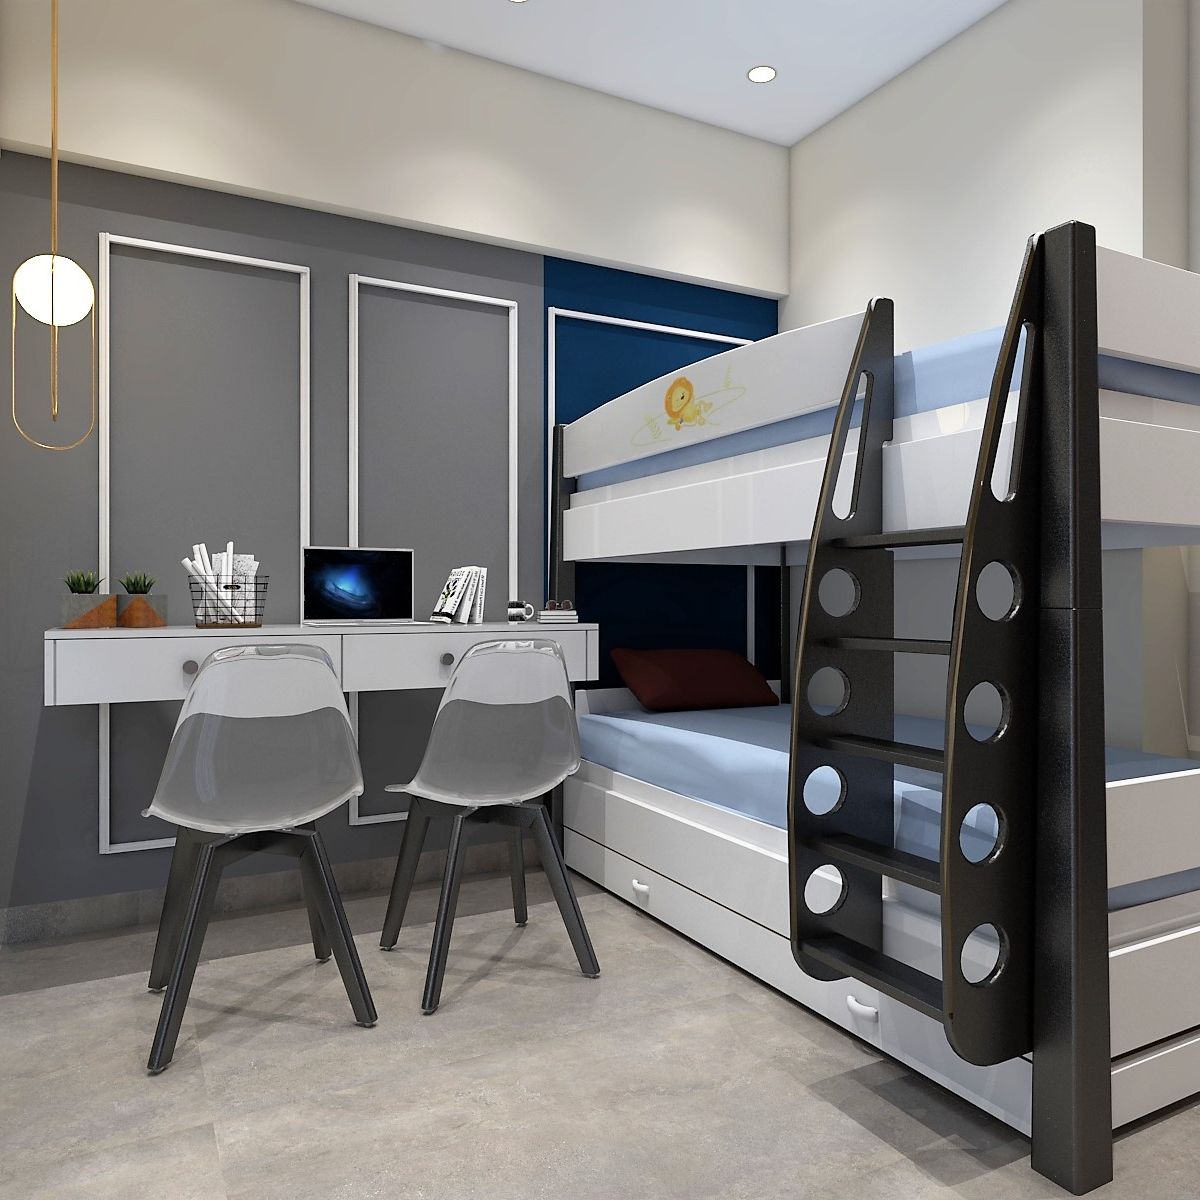 Contemporary Grey And Blue Boys Room Design With Bunk Bed